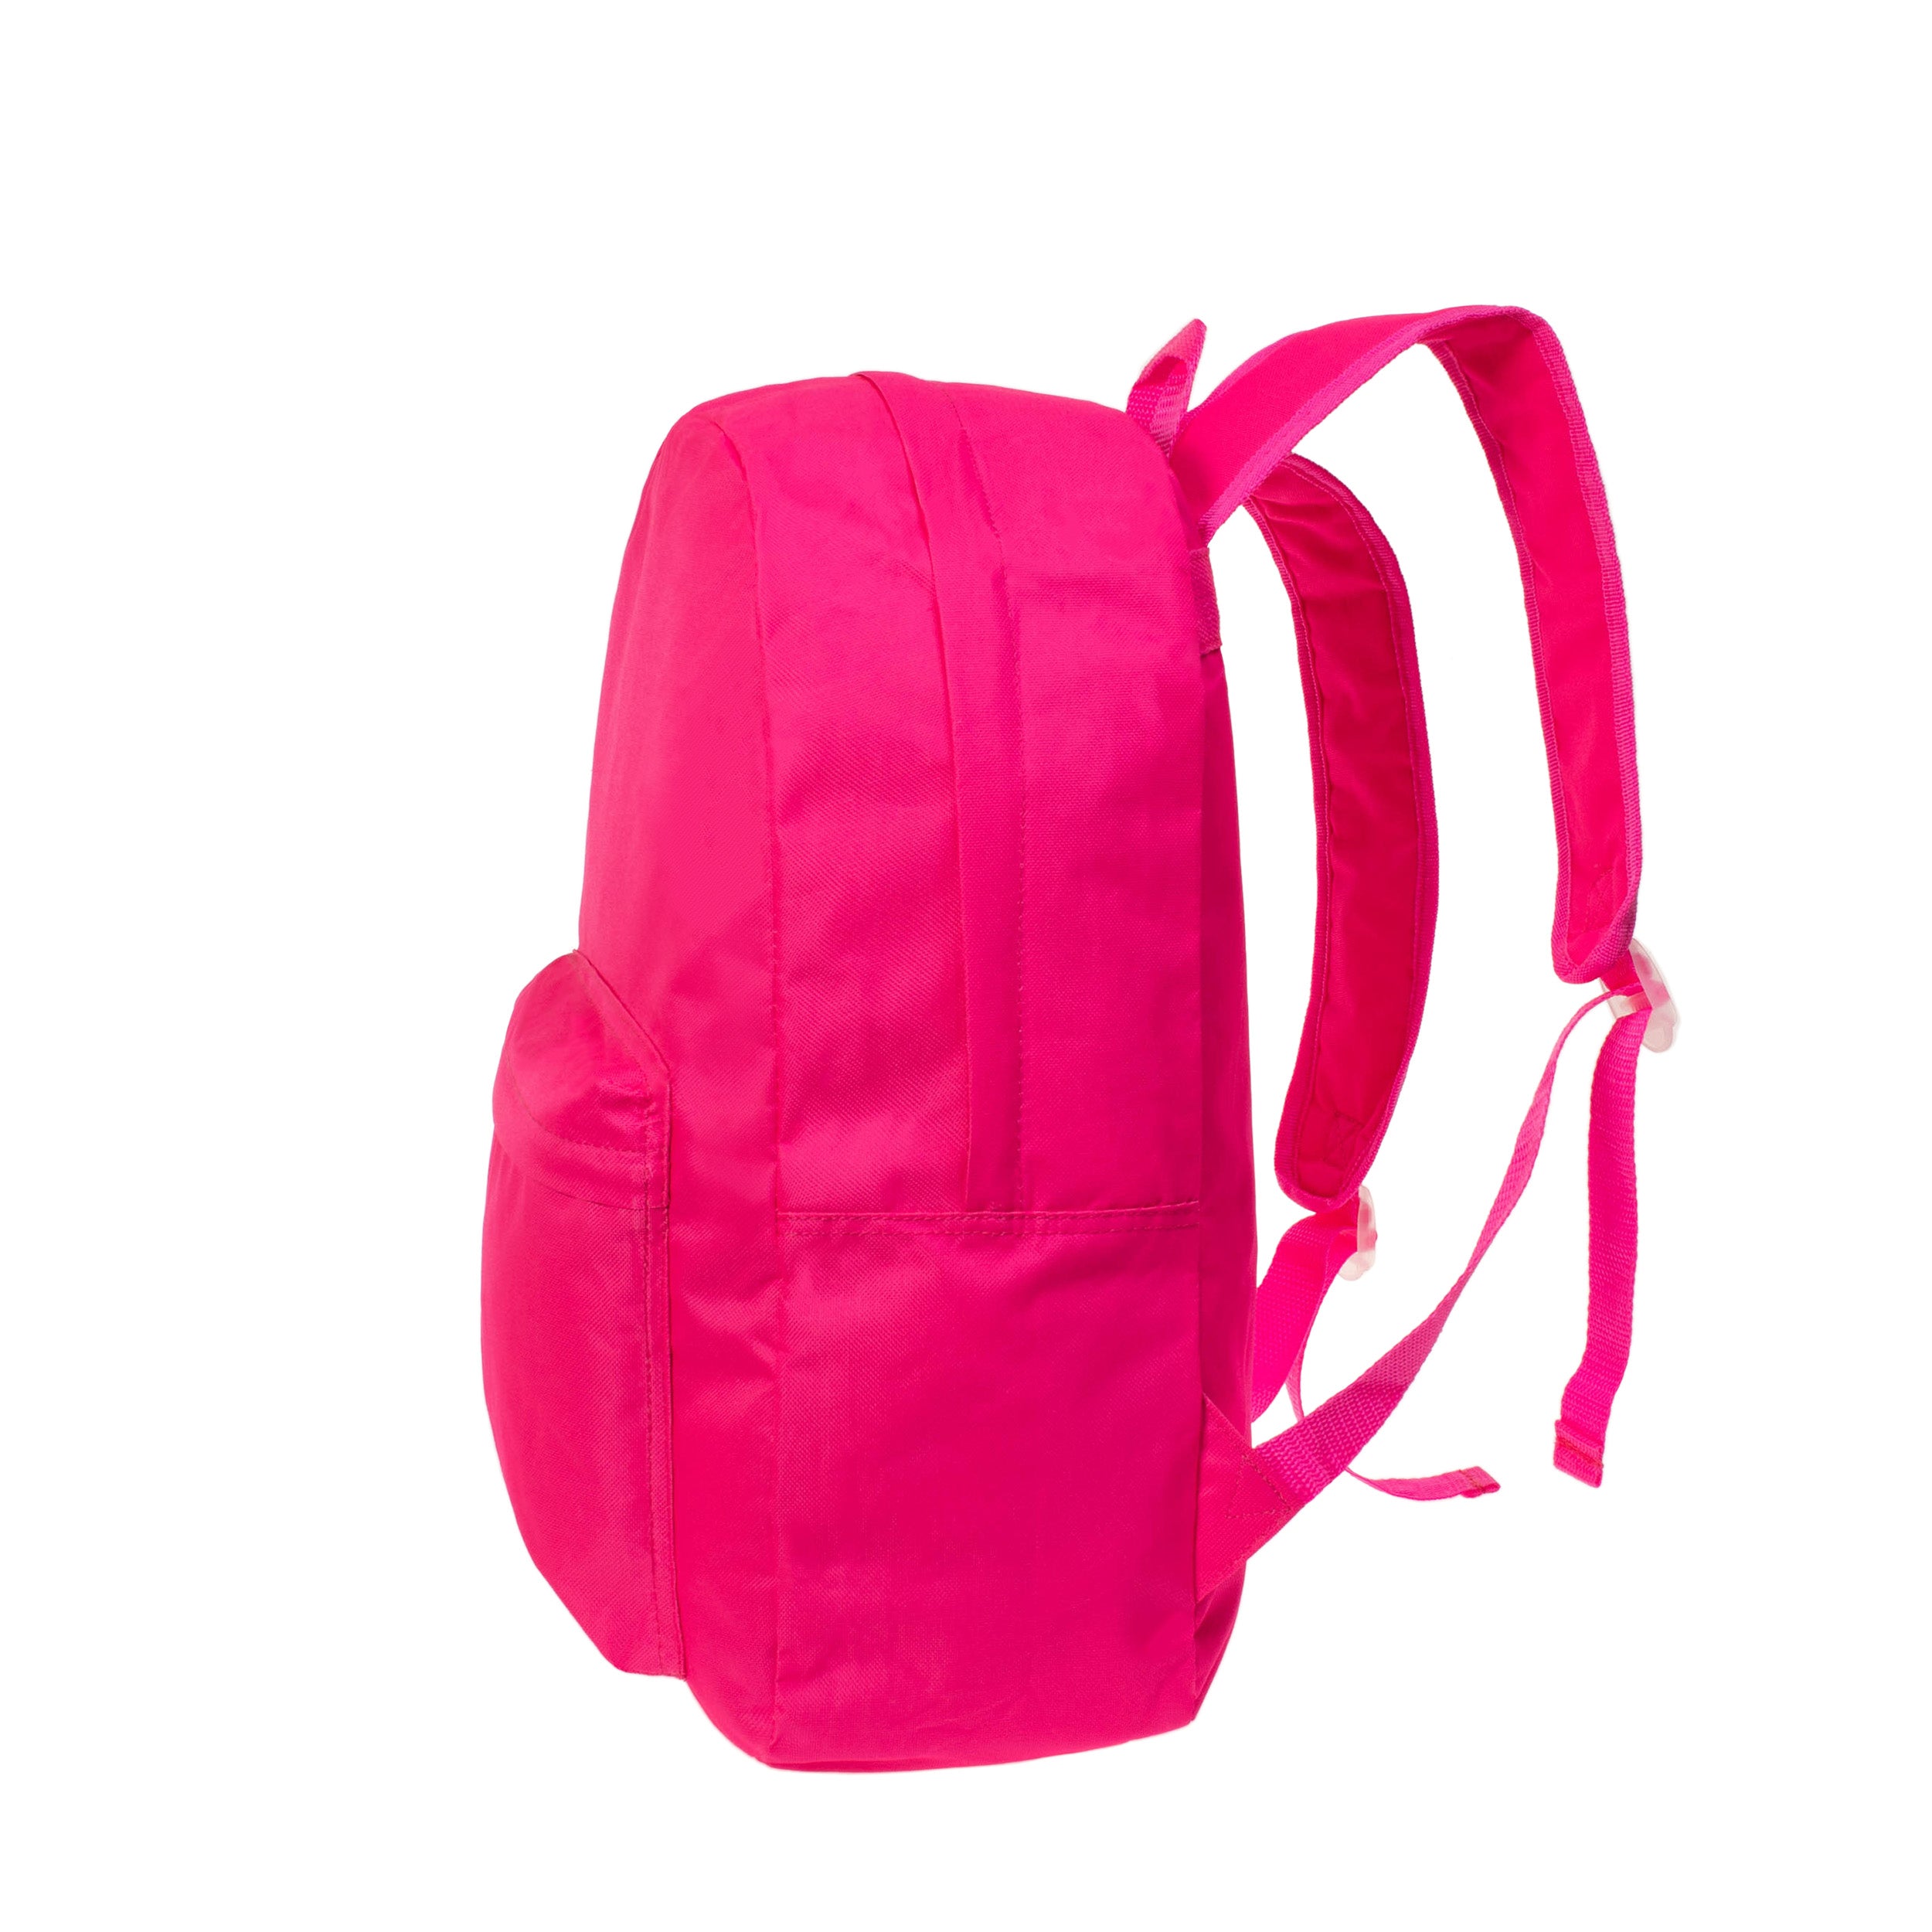 Wholesale Kids Backpacks School - Neon Colored Straw Backpack for Children